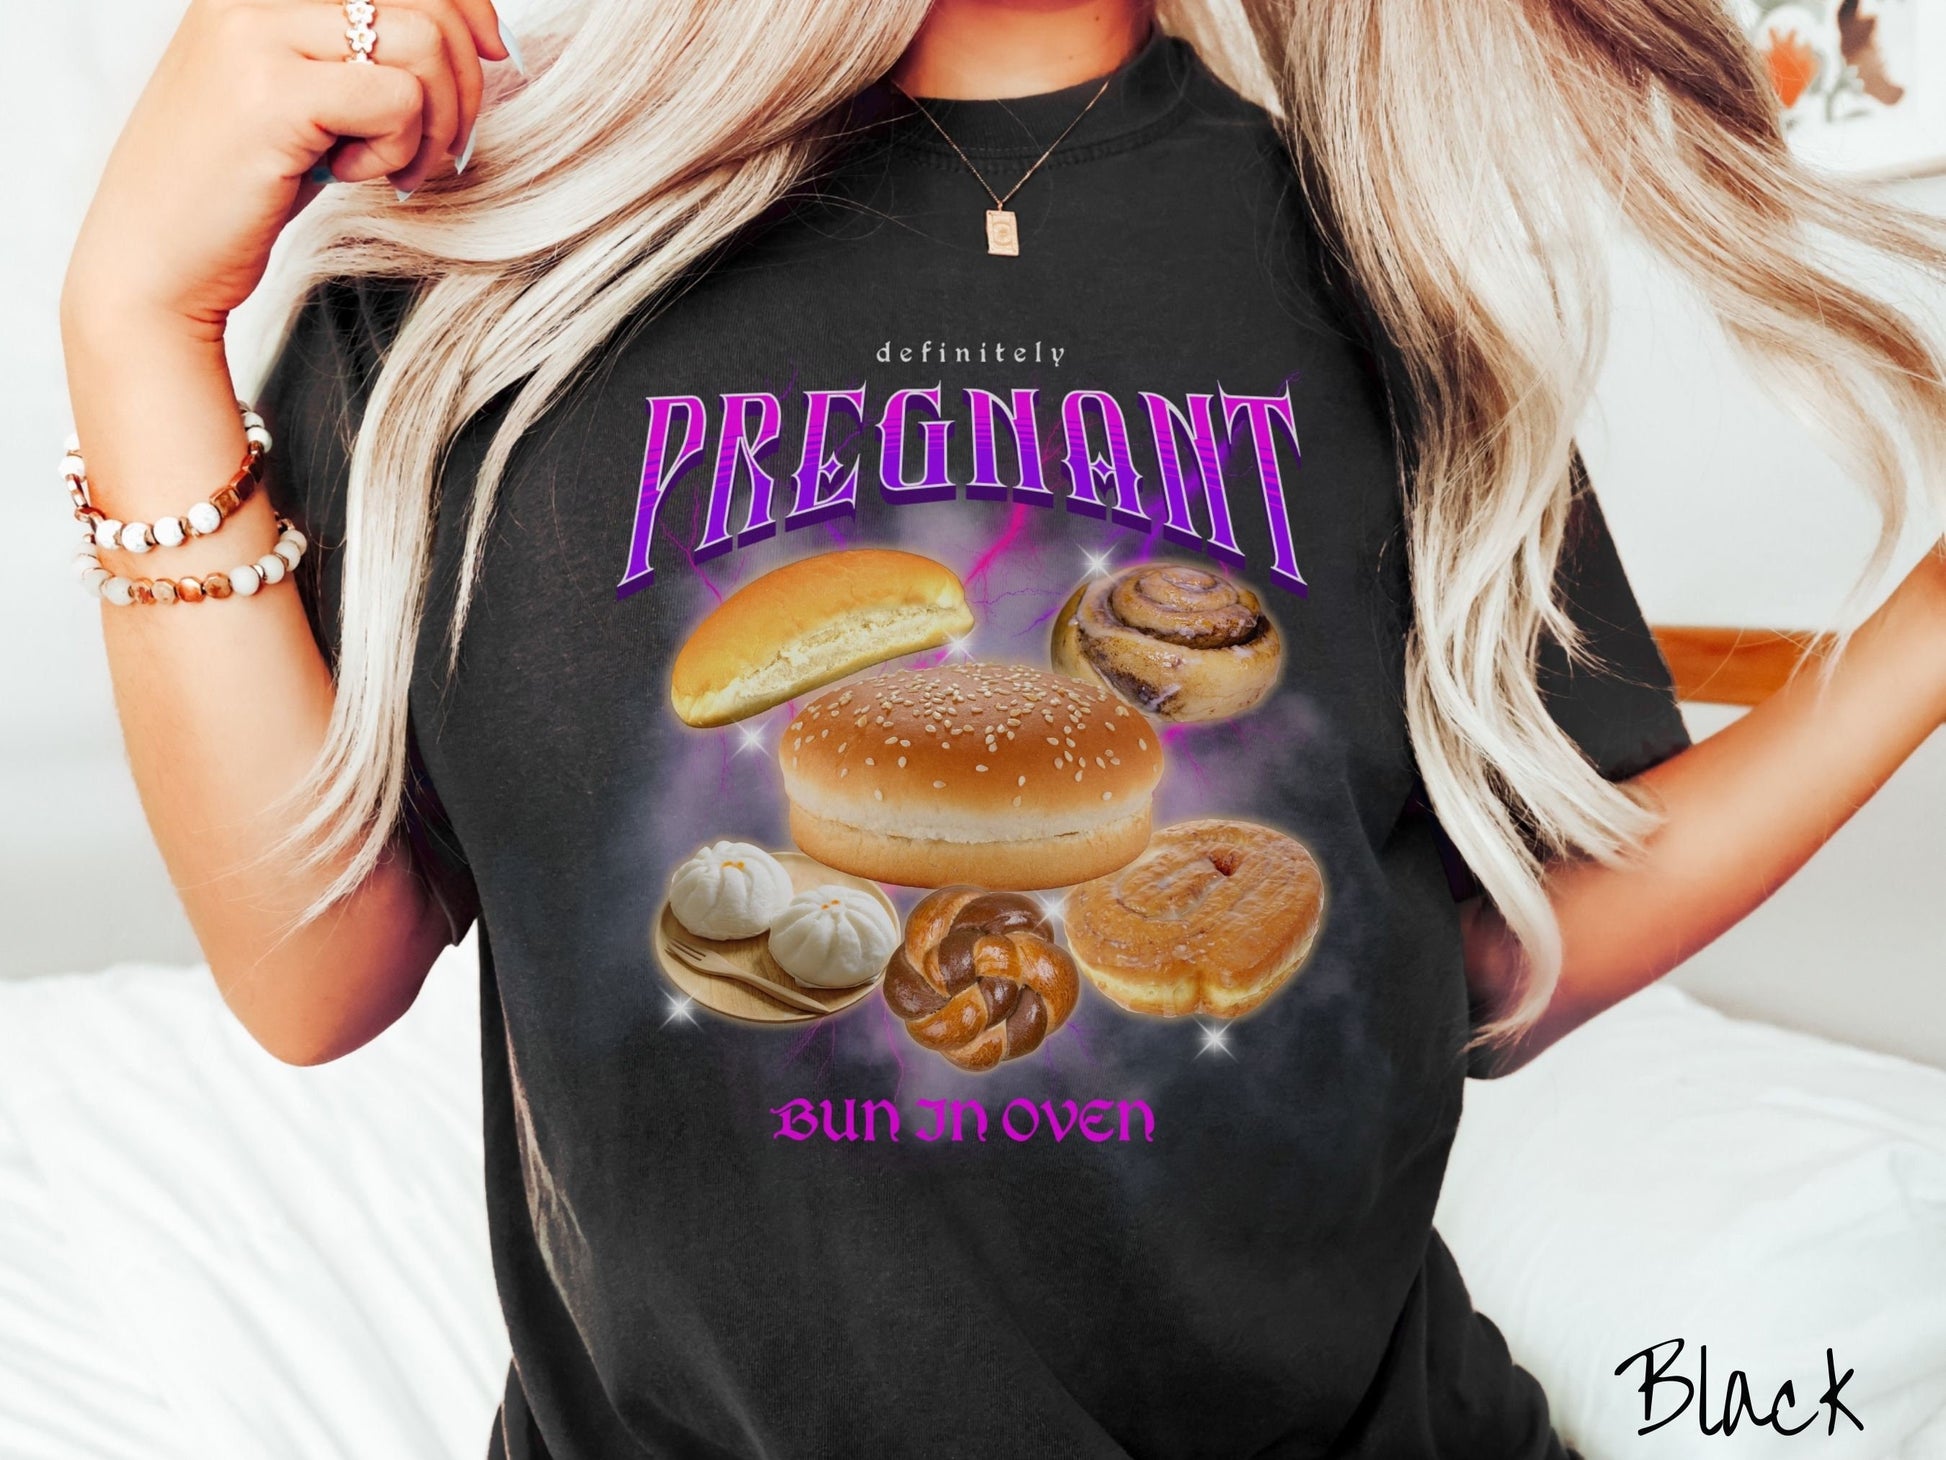 A woman wearing a vintage, black colored Comfort Colors t-shirt with the text Definitely Pregnant Bun In Oven in purple font. Between the text are different breads like hamburger and hotdog buns, cinnamon rolls, and donuts.